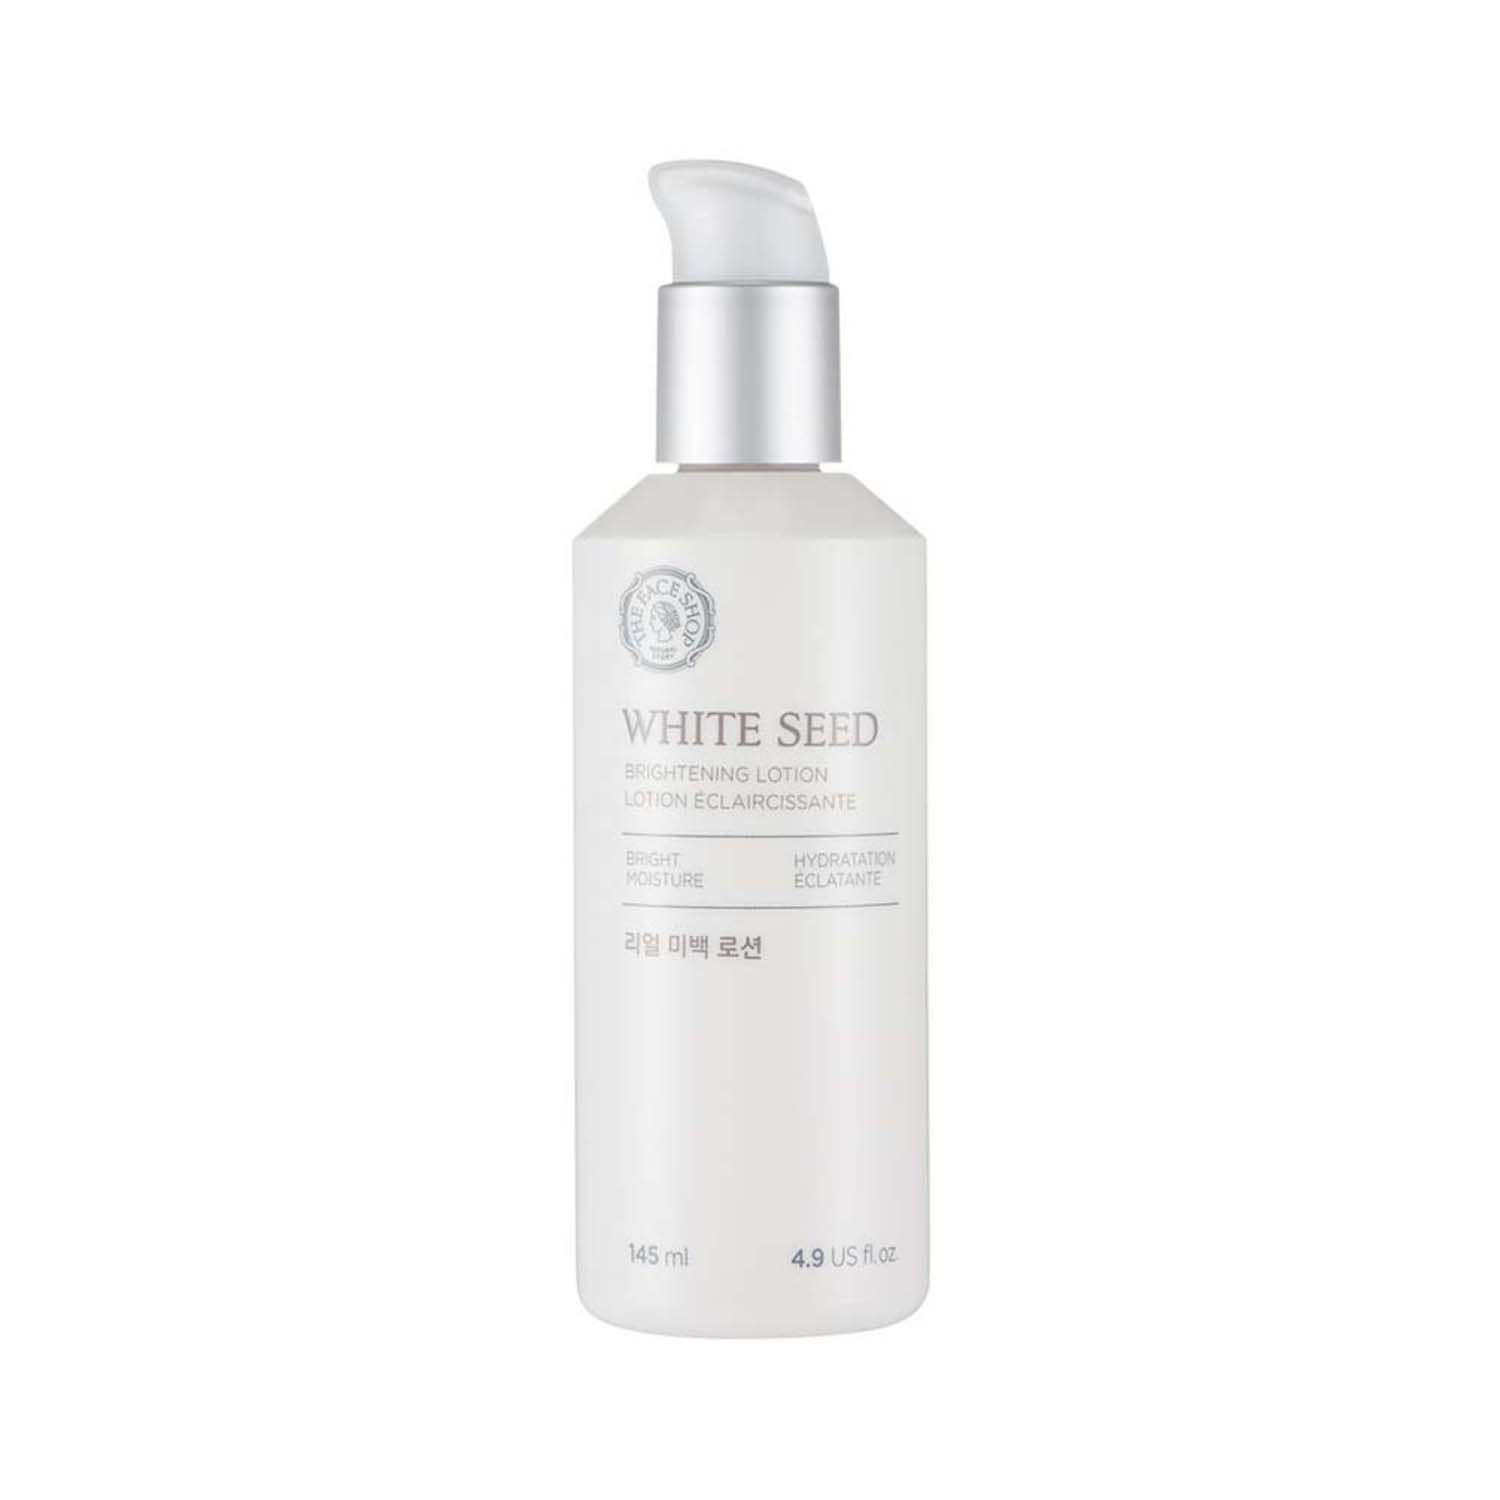 The Face Shop | The Face Shop White Seed Brightening Lotion (145ml)